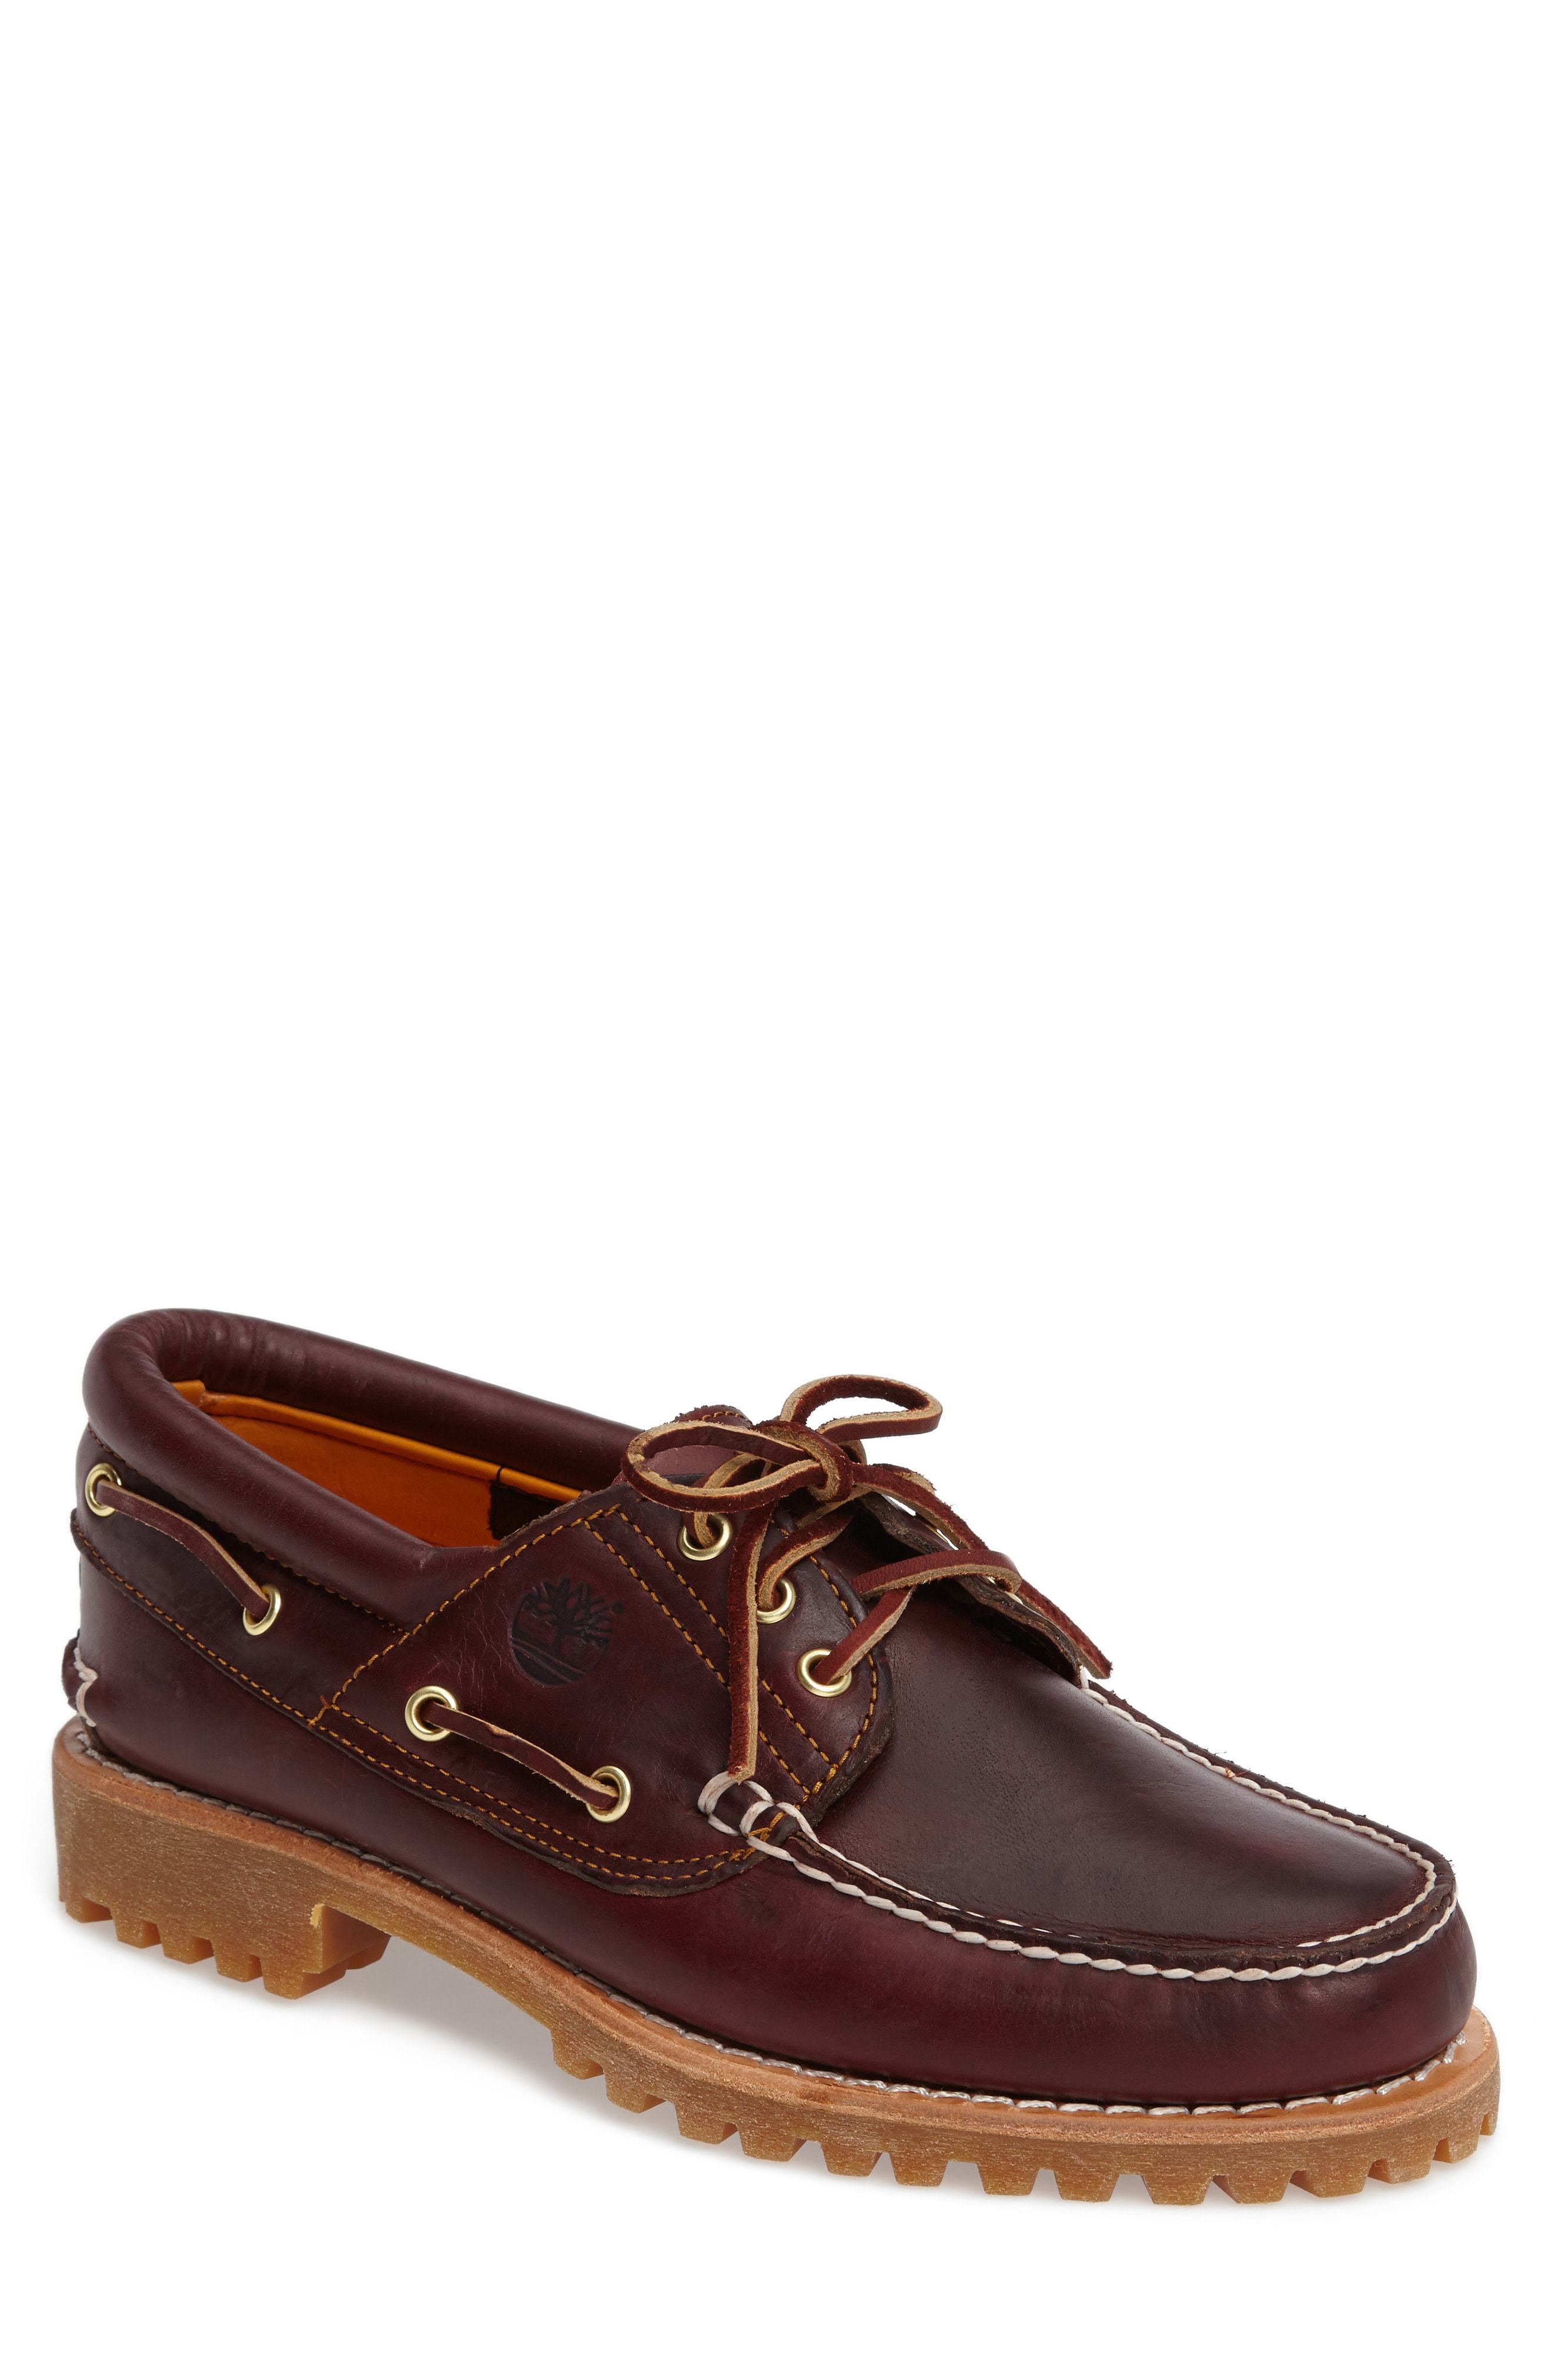 Fulfill courage about Timberland Authentic Boat Shoe, $150 | Nordstrom | Lookastic